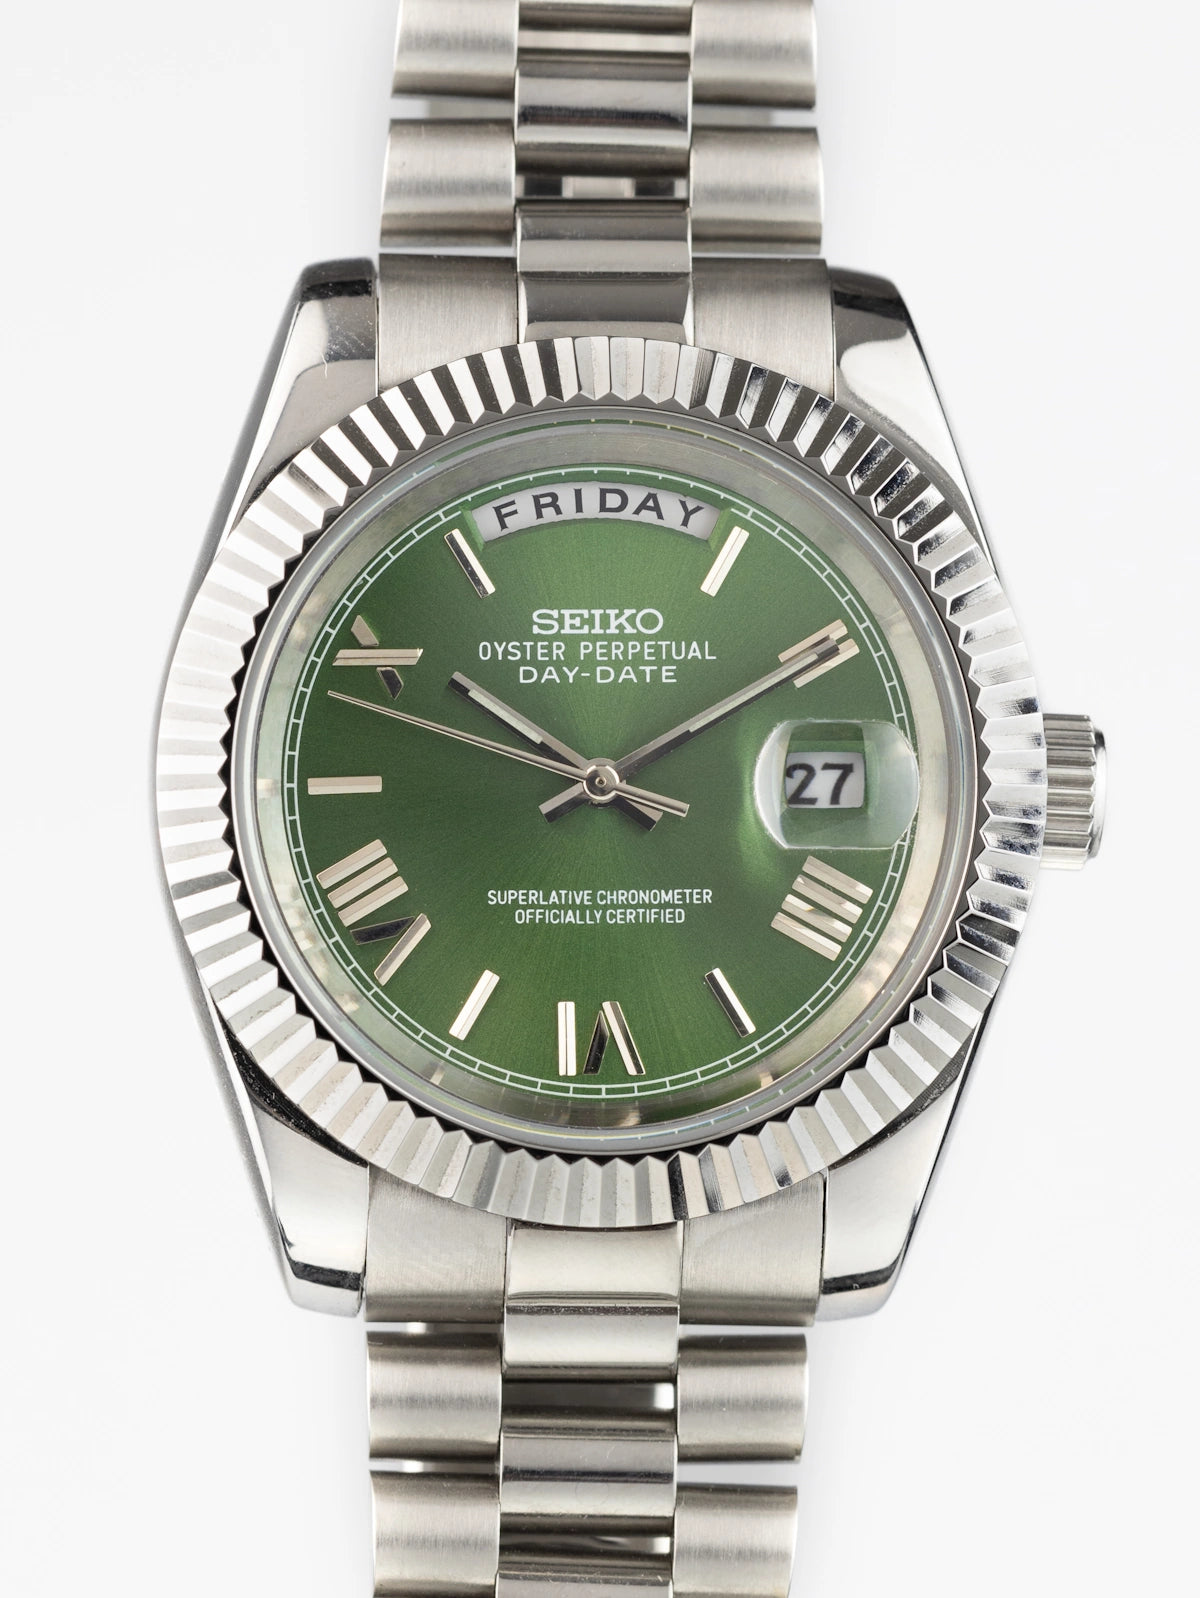 Montre Seiko Mod Oyster Perpetual Day-Date avec cadran olive